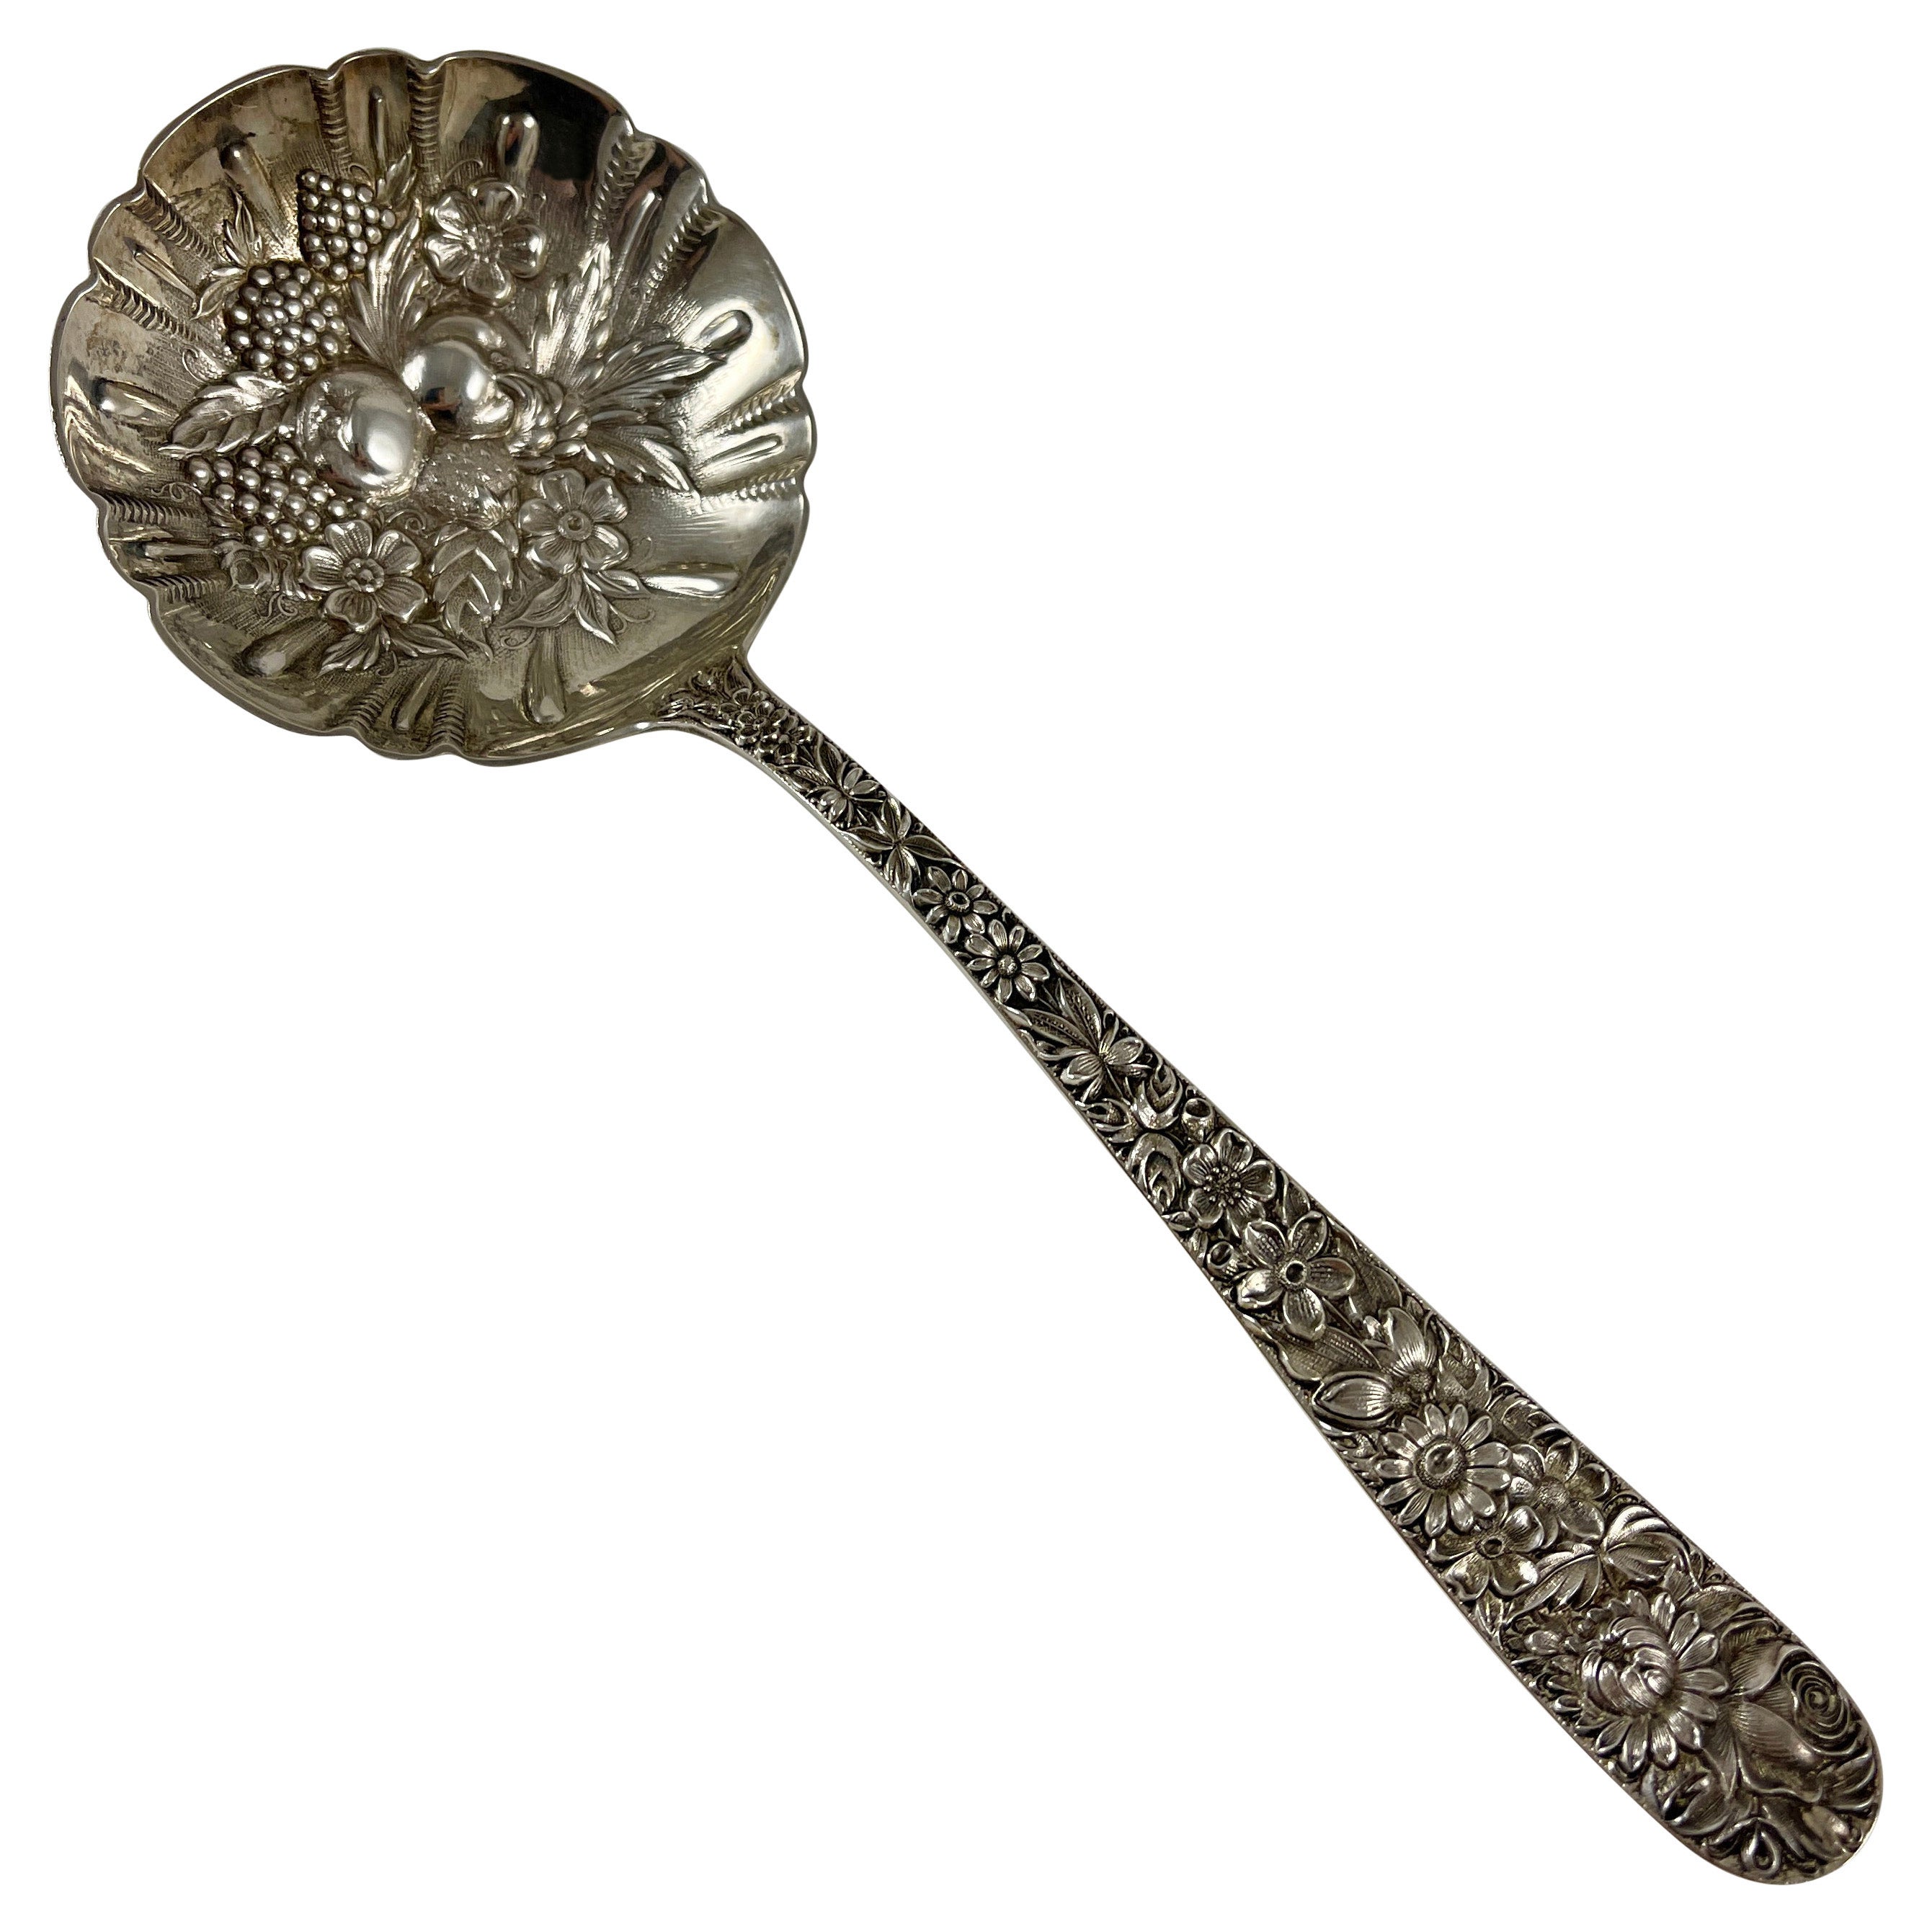 S.Kirk & Son Solid Sterling Silver 925 5.25" Repousse SAUCE/CREAM LADLE 